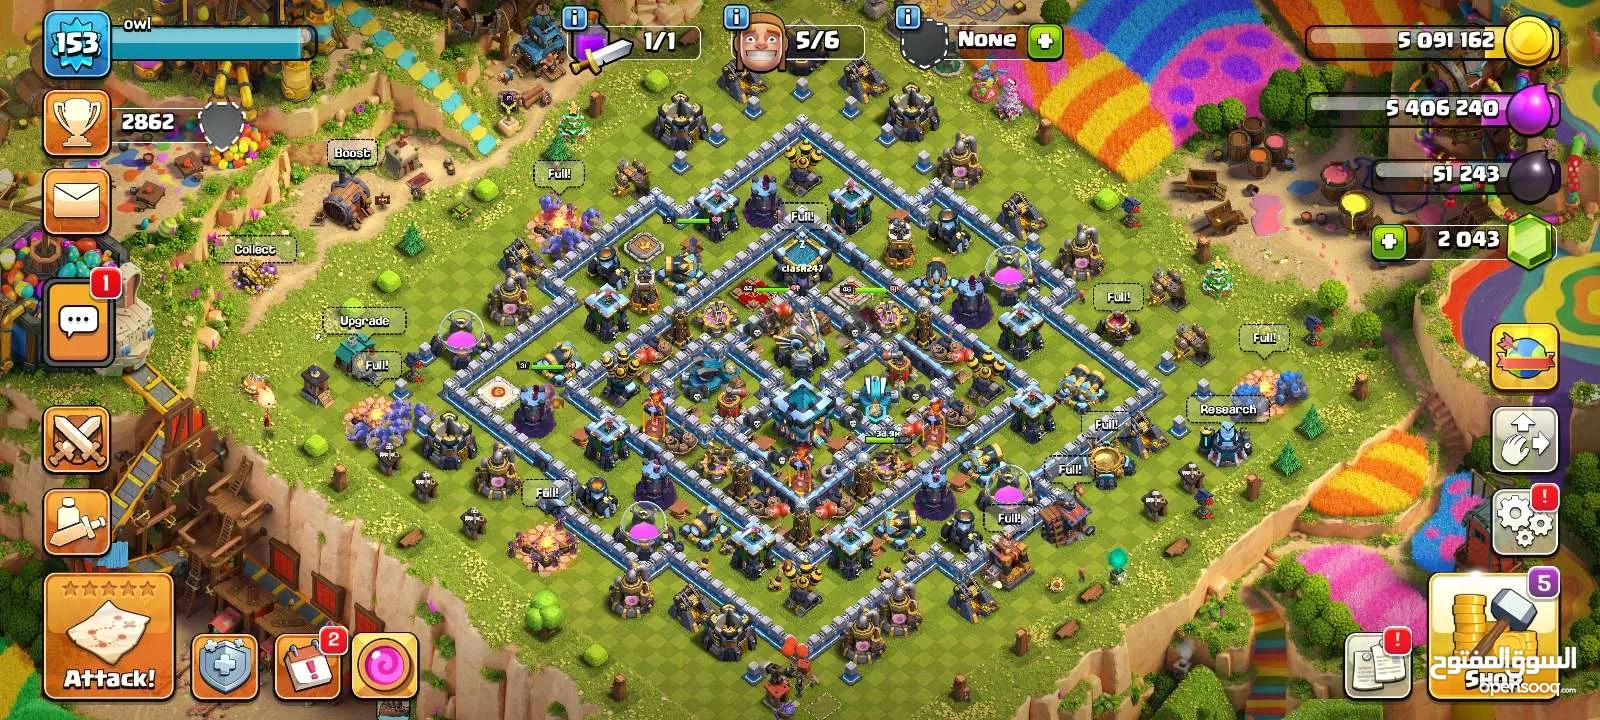 2016 Clash of Clans account for cheap